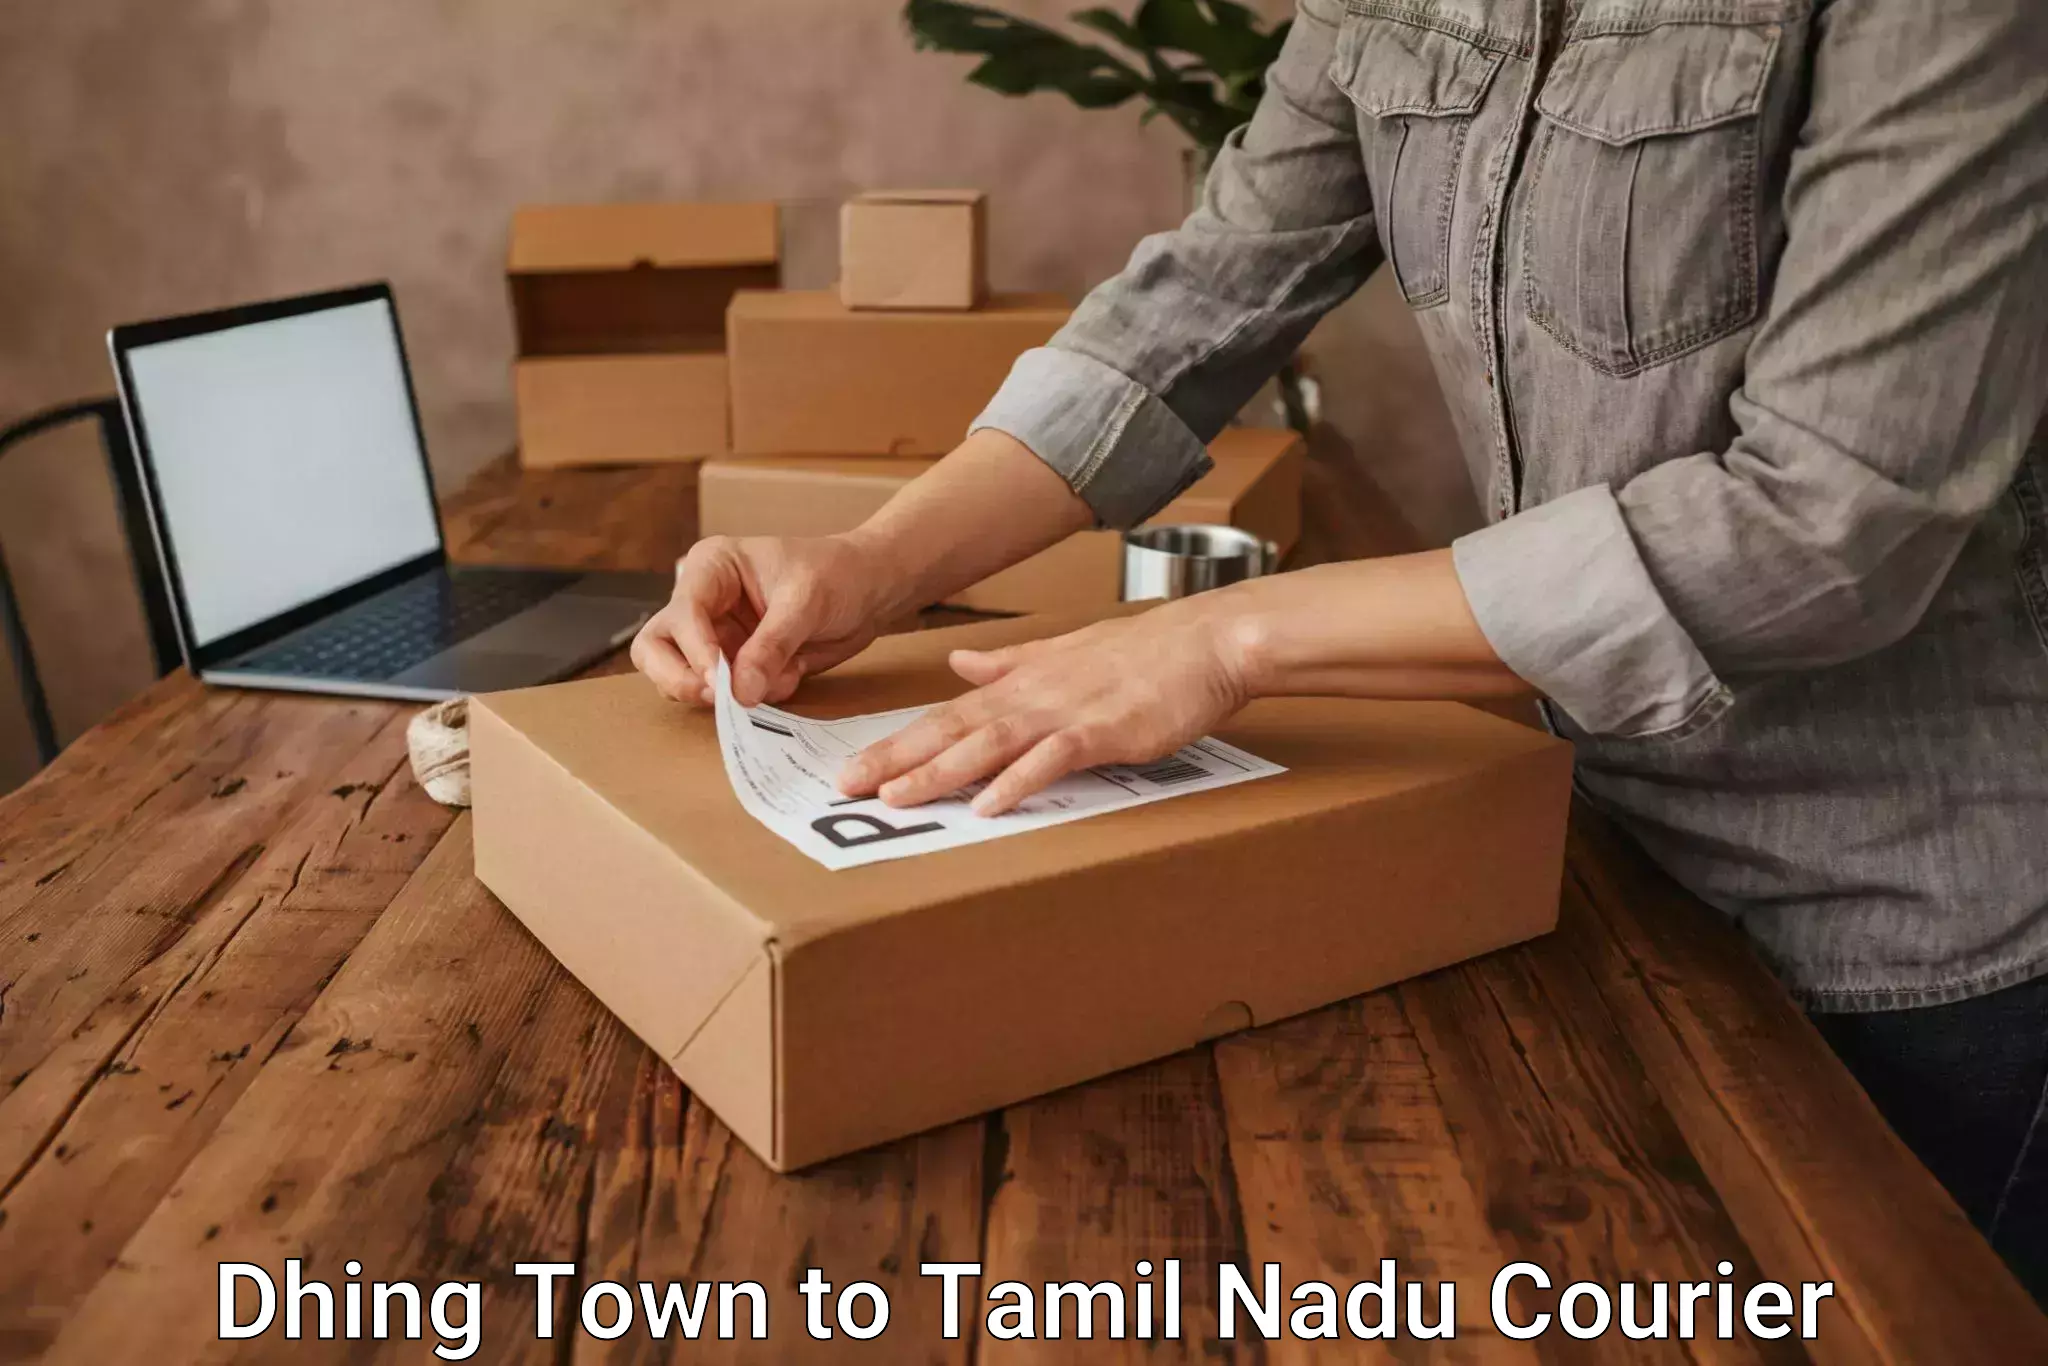 Nationwide parcel services Dhing Town to Chennai Port